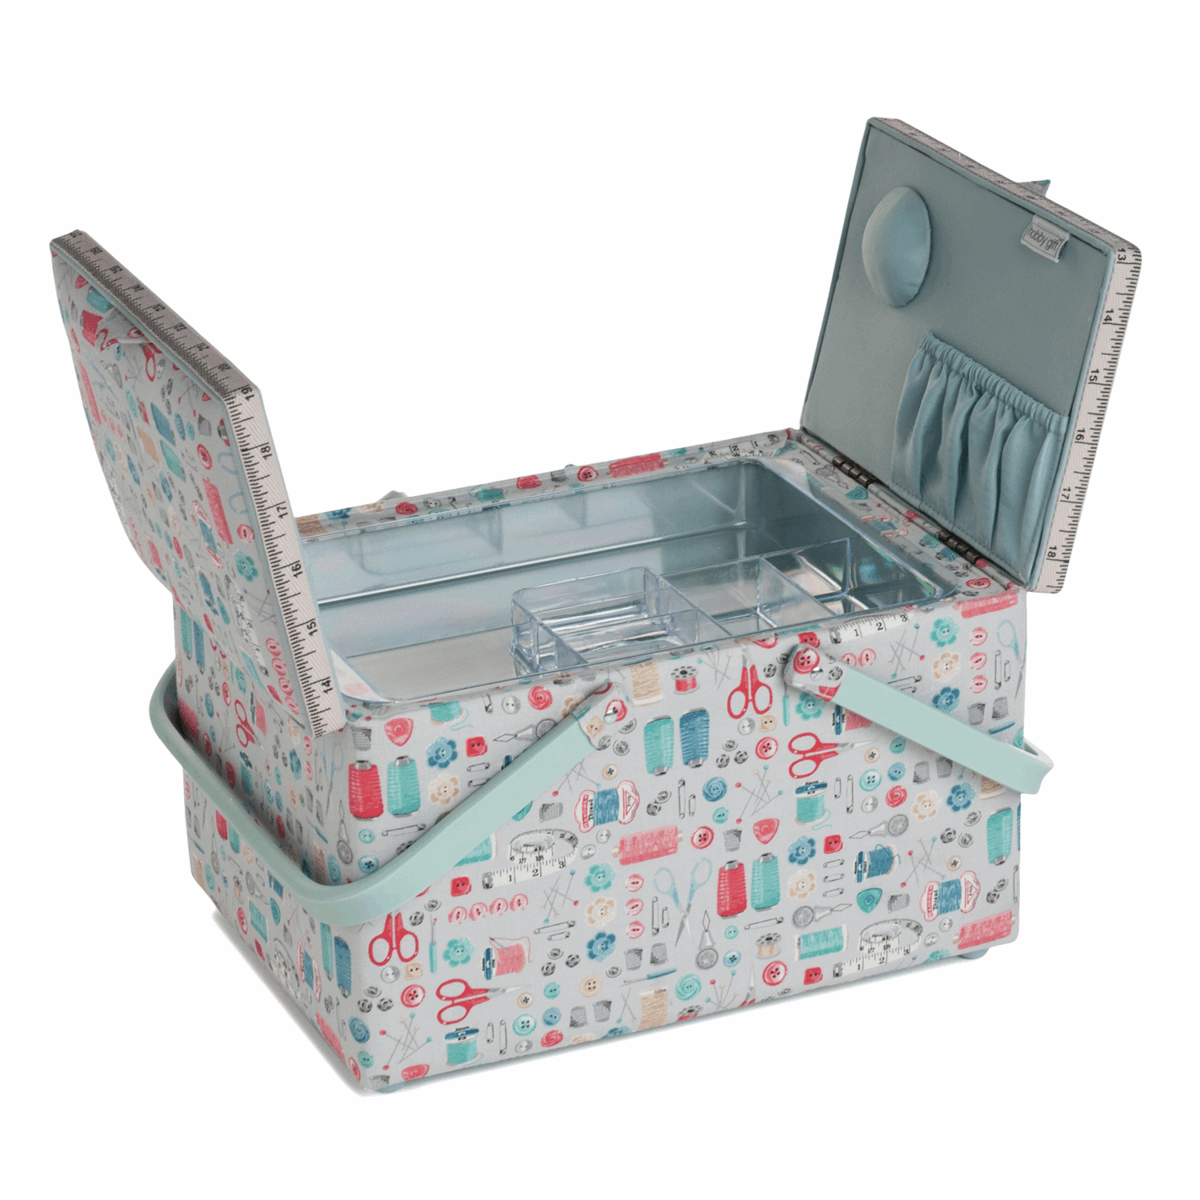 Stitch in Time PVC Twin Lid Sewing Box - Large